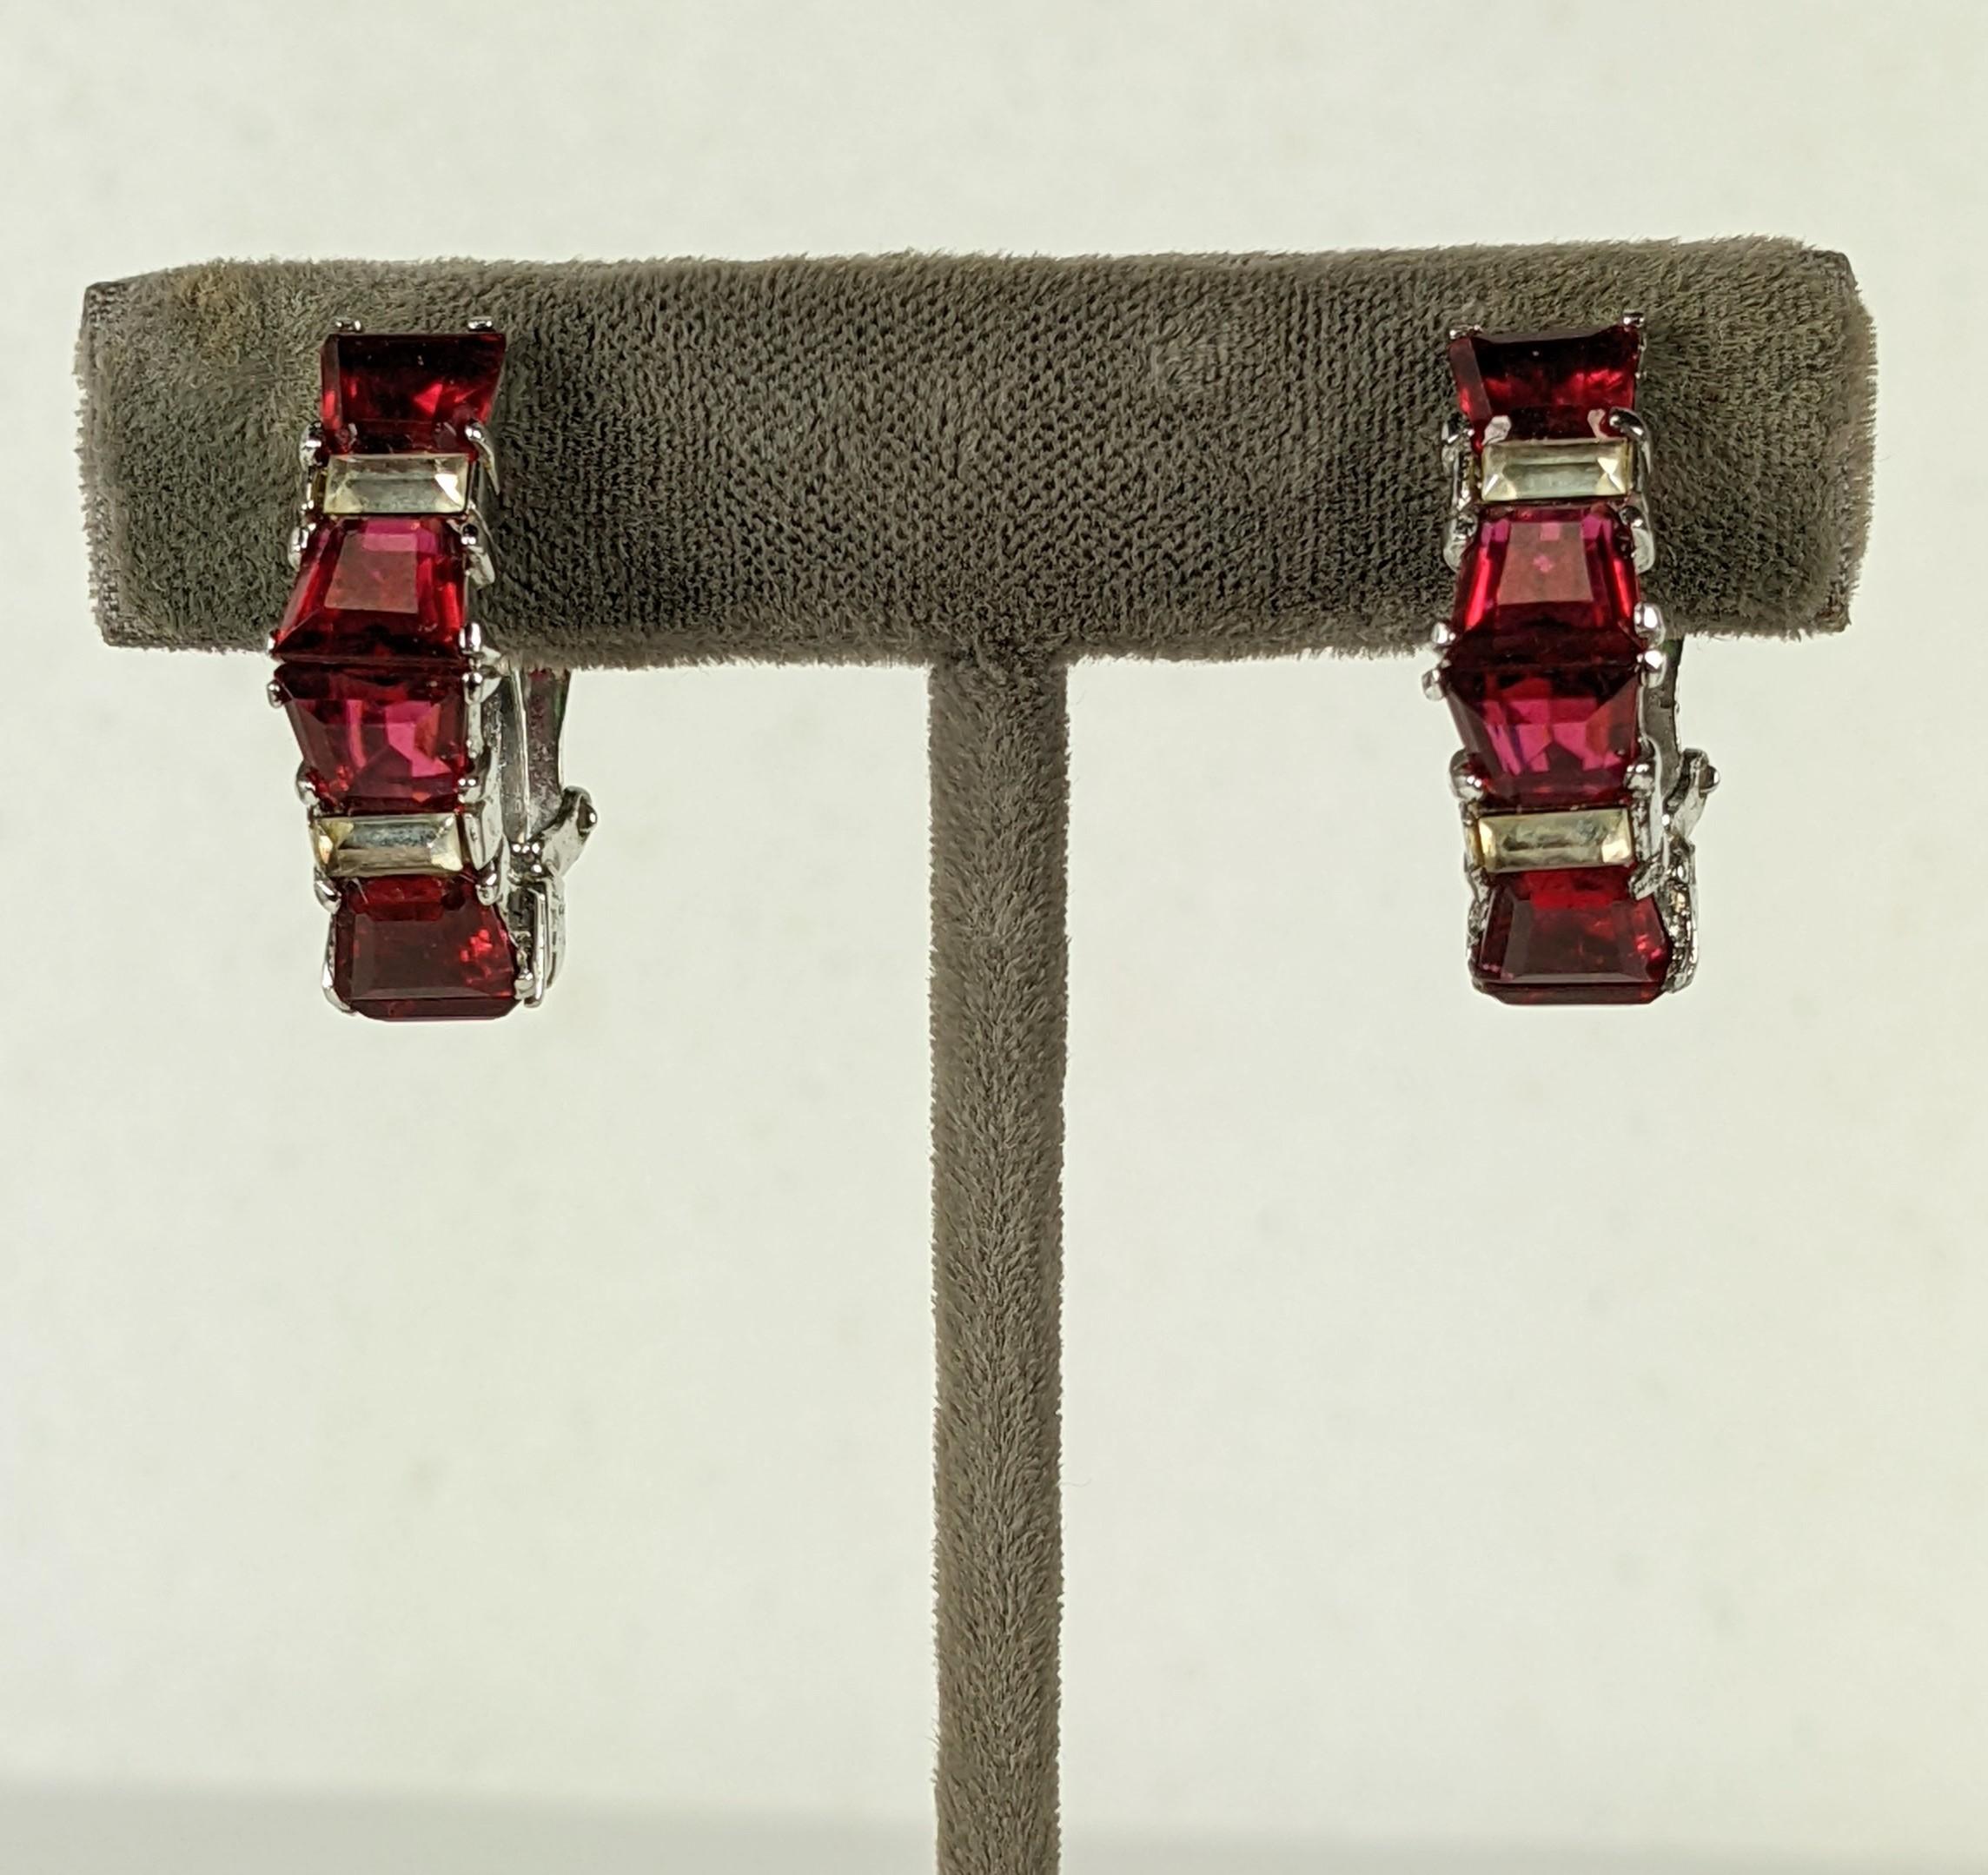 Early Boucher Faux Ruby Earrings in sterling with rhodium plate finish. Faux rubies are channel set in a half hoop form with baguettes in between. Marked 